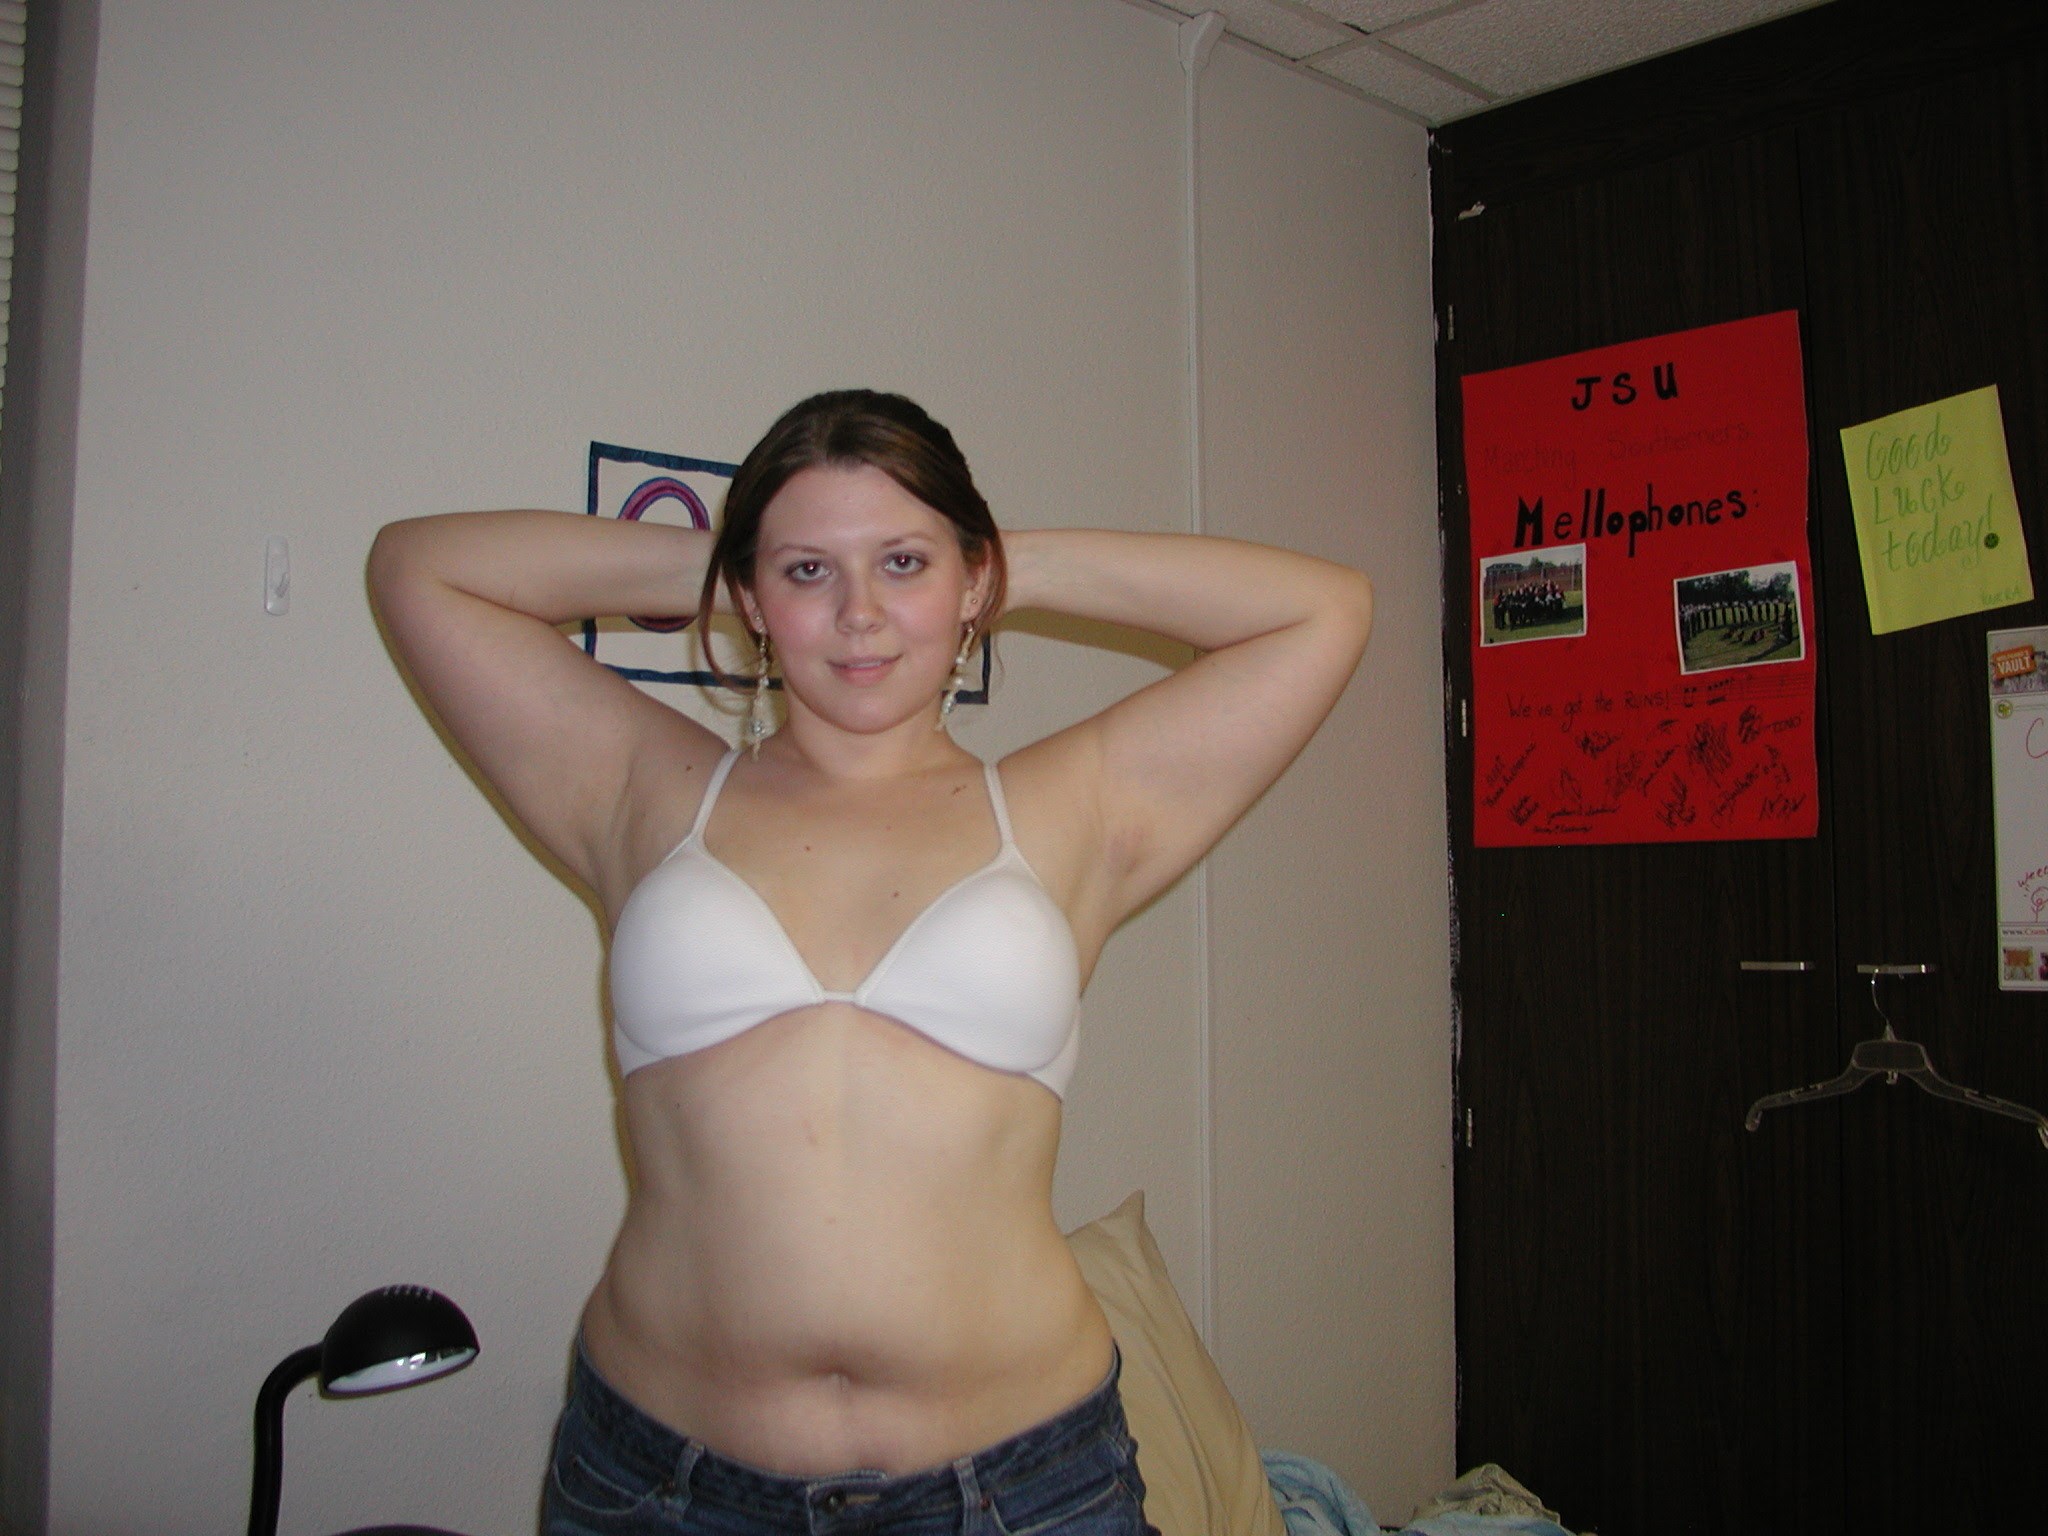 Fat Women with Small Breasts Getting Laid (80 photos) - sex eporner pics